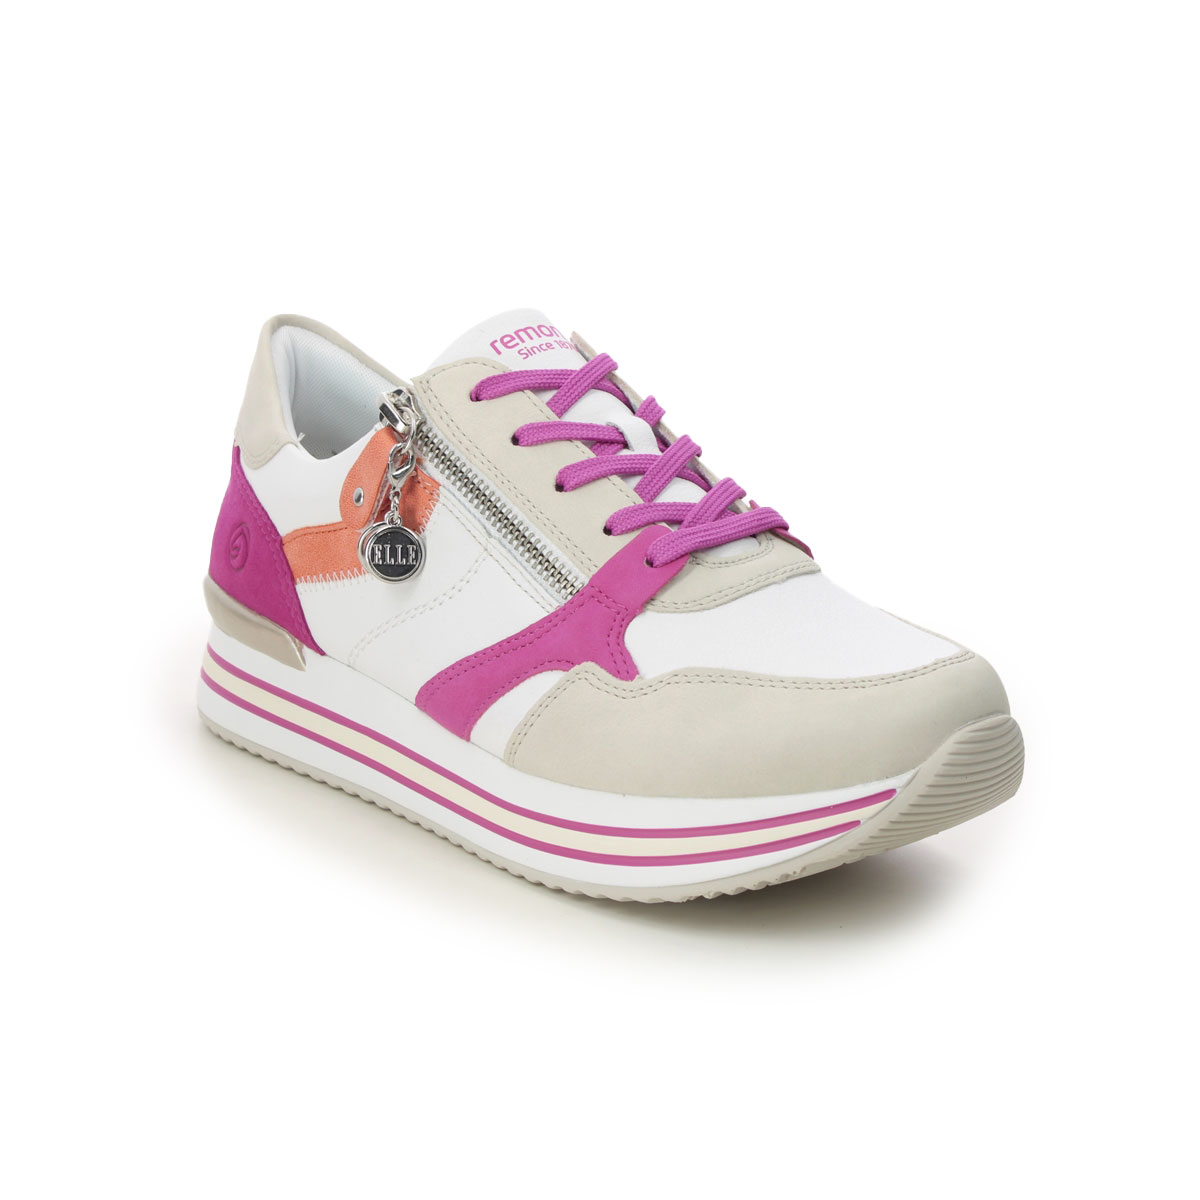 Remonte D1323-80 Range Zip Elle White multi Womens trainers in a Plain Leather in Size 40